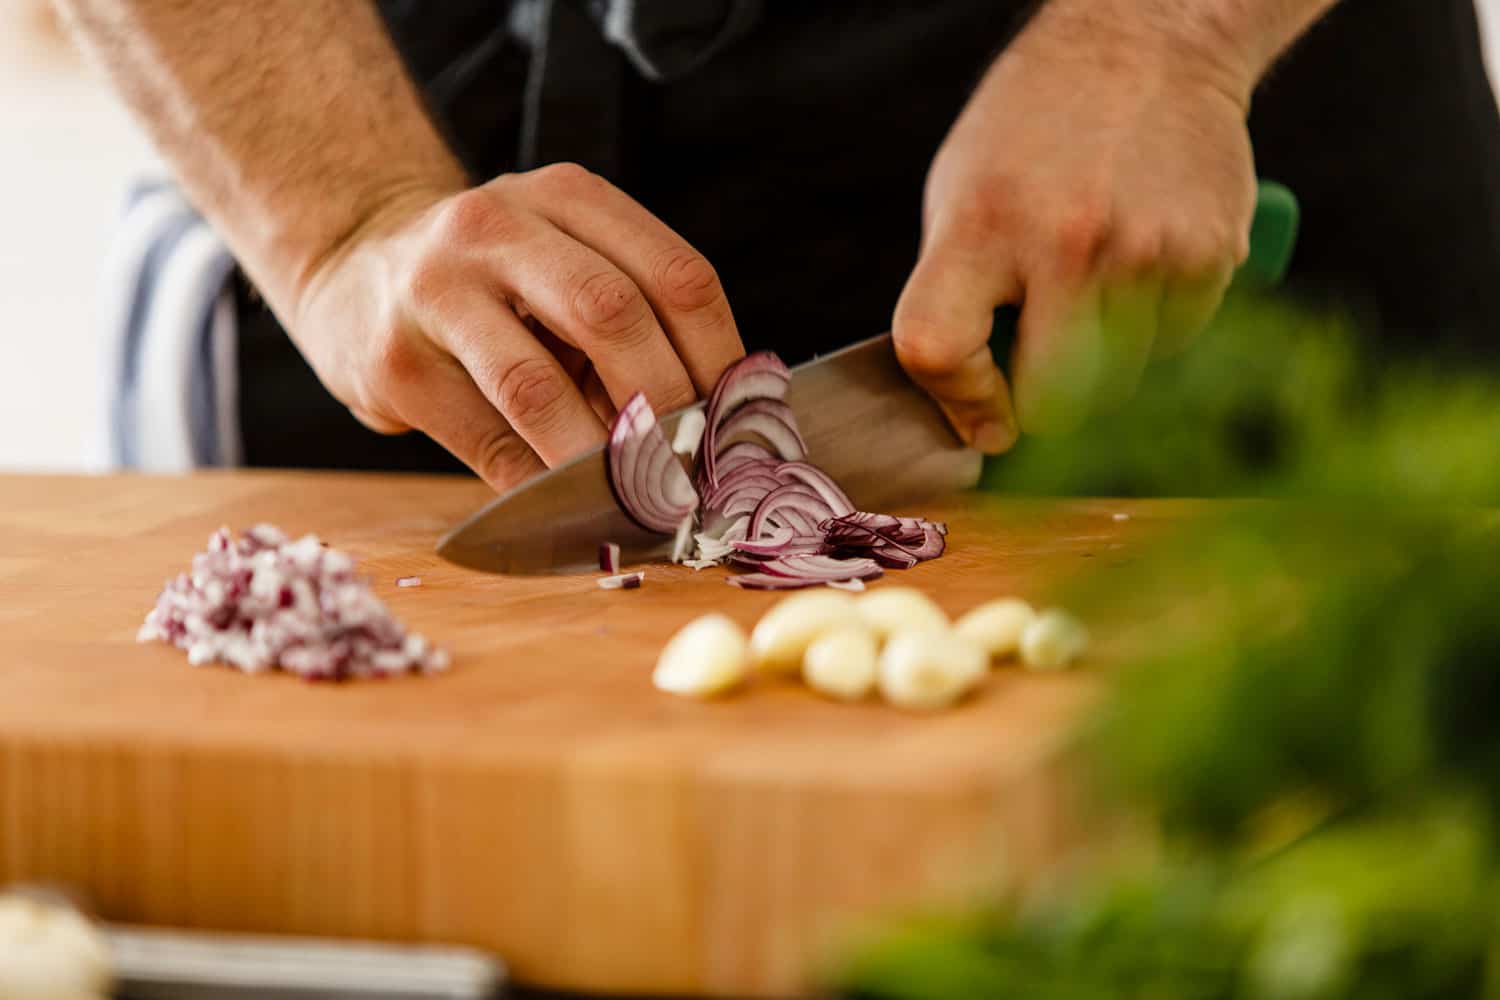 Chef slicing red onion on cutting board, close-up